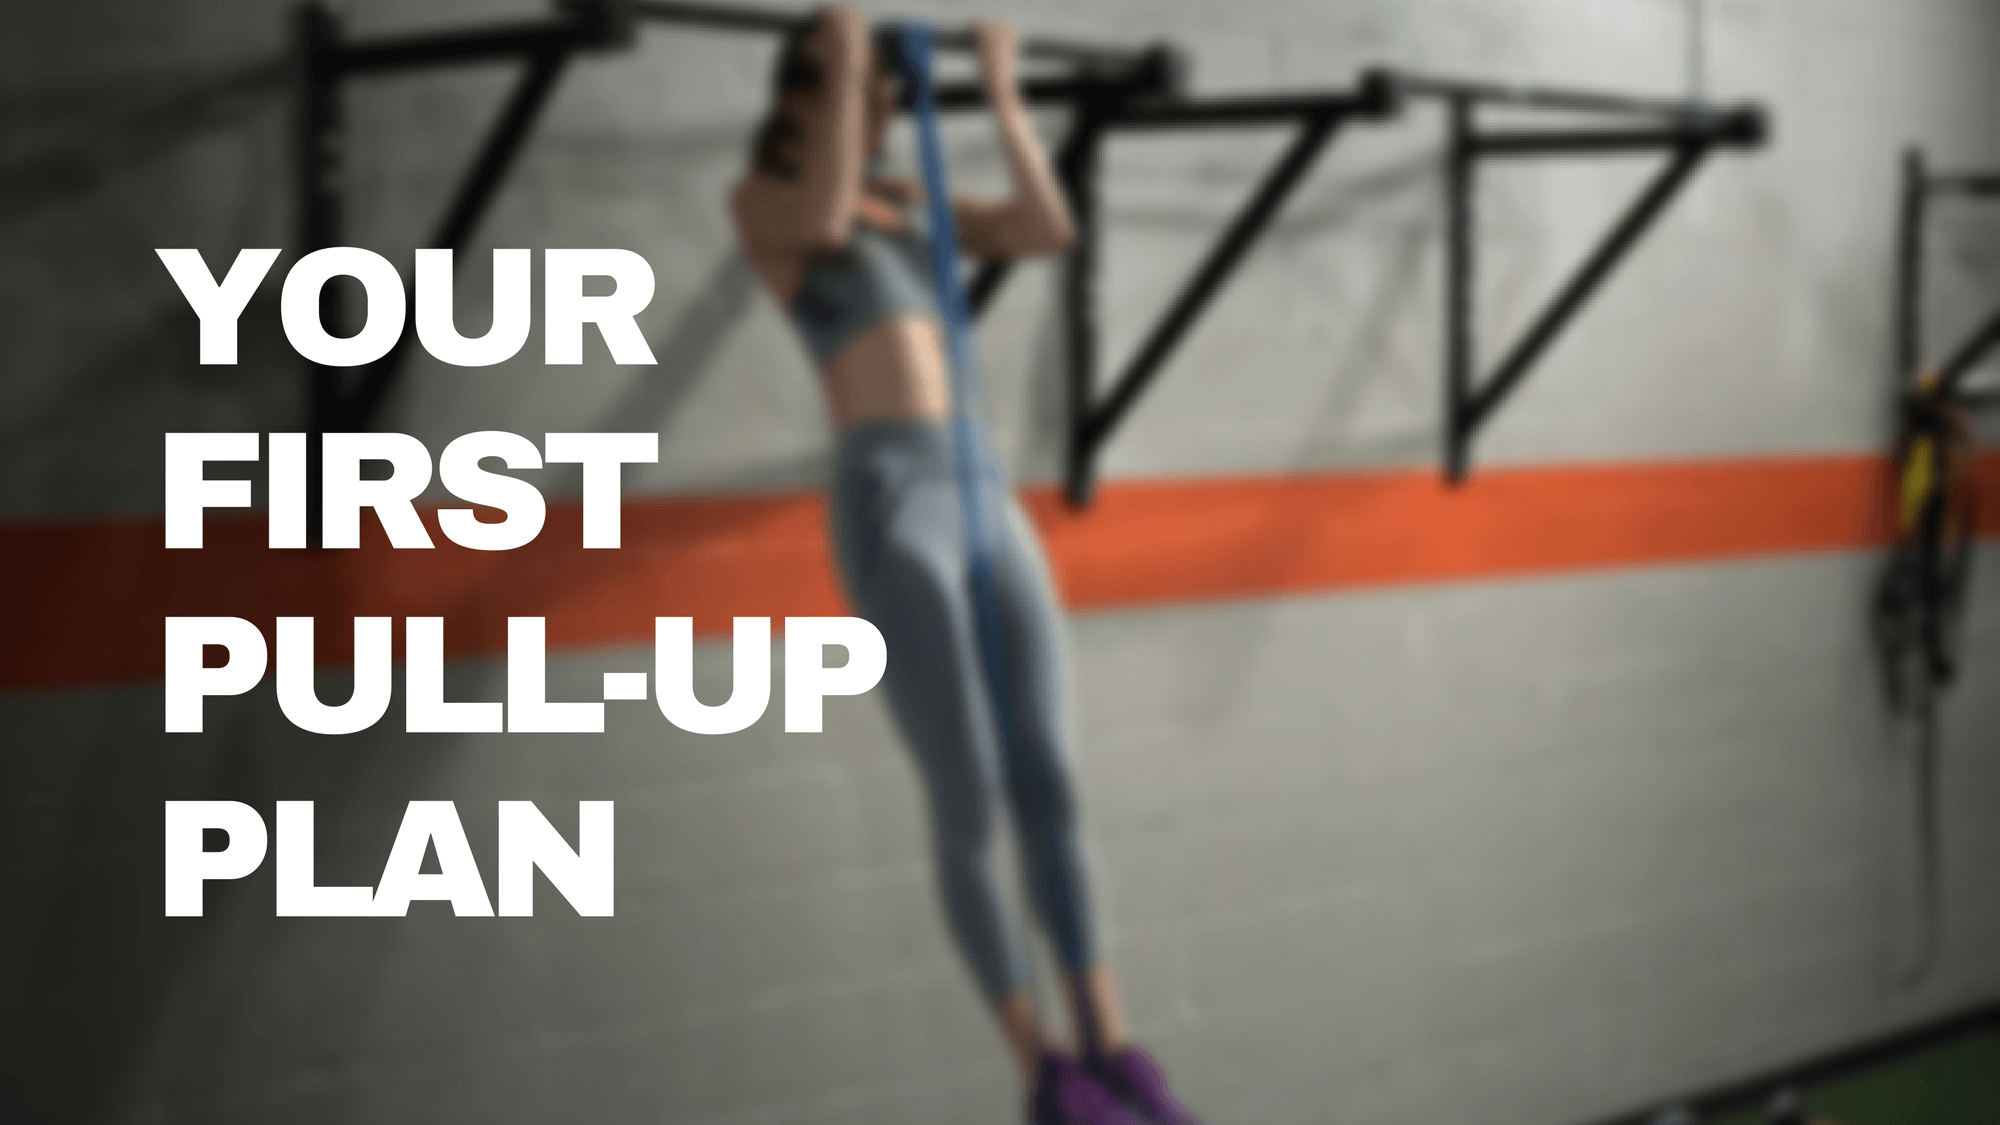 Featured image for “Better Way to Build Unassisted Pull-up Strength”